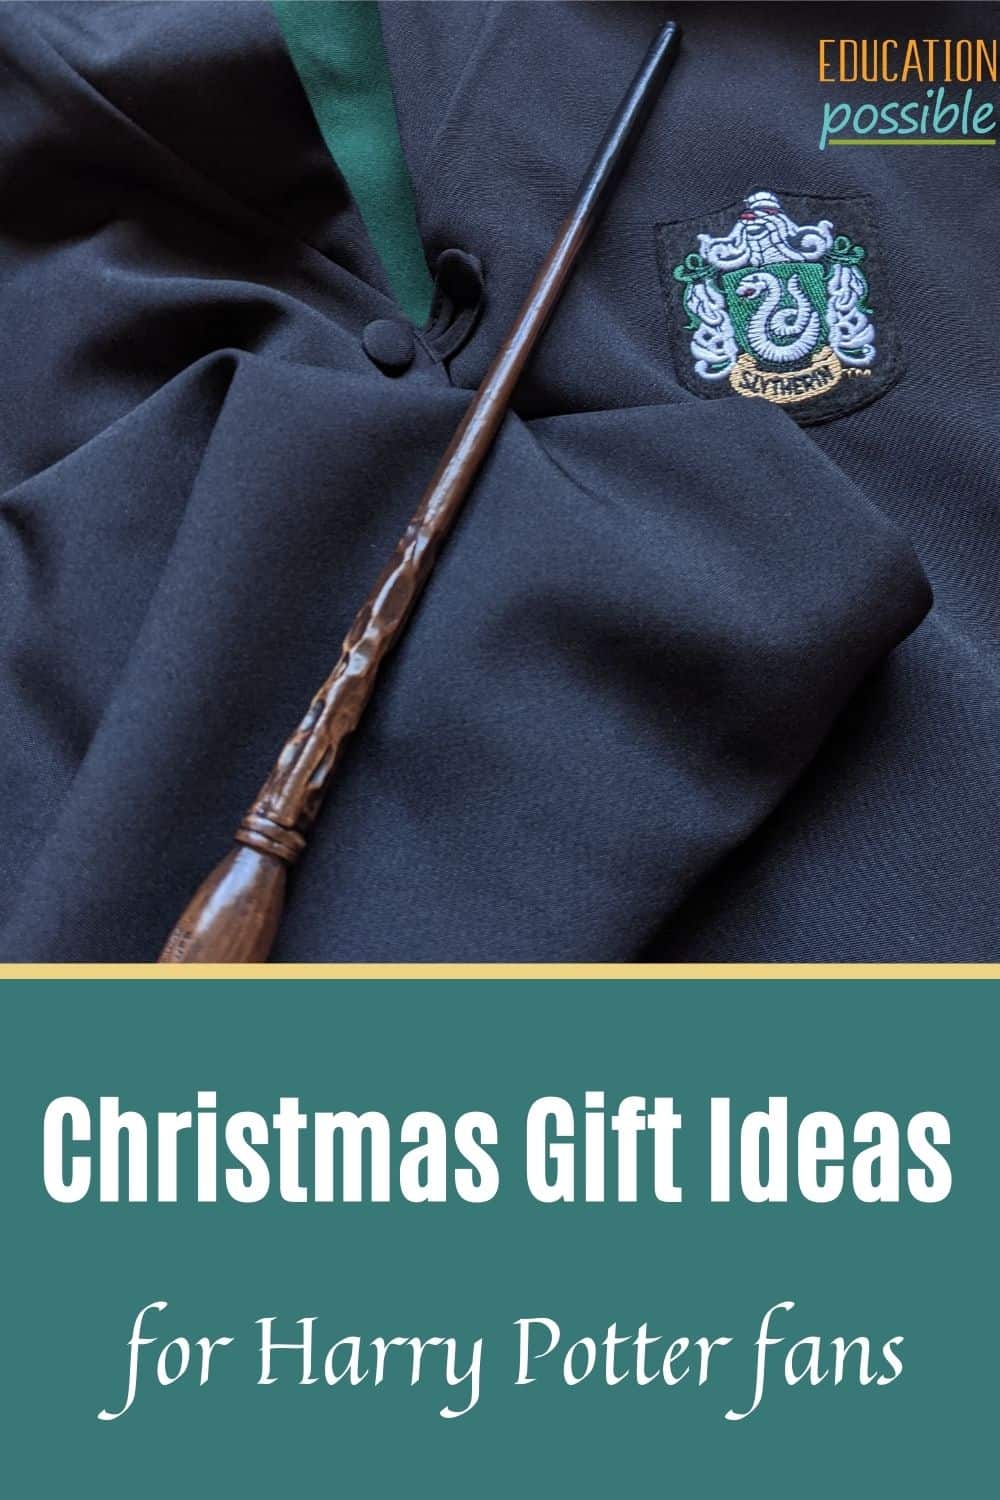 Harry Potter Slytherin robe and wand